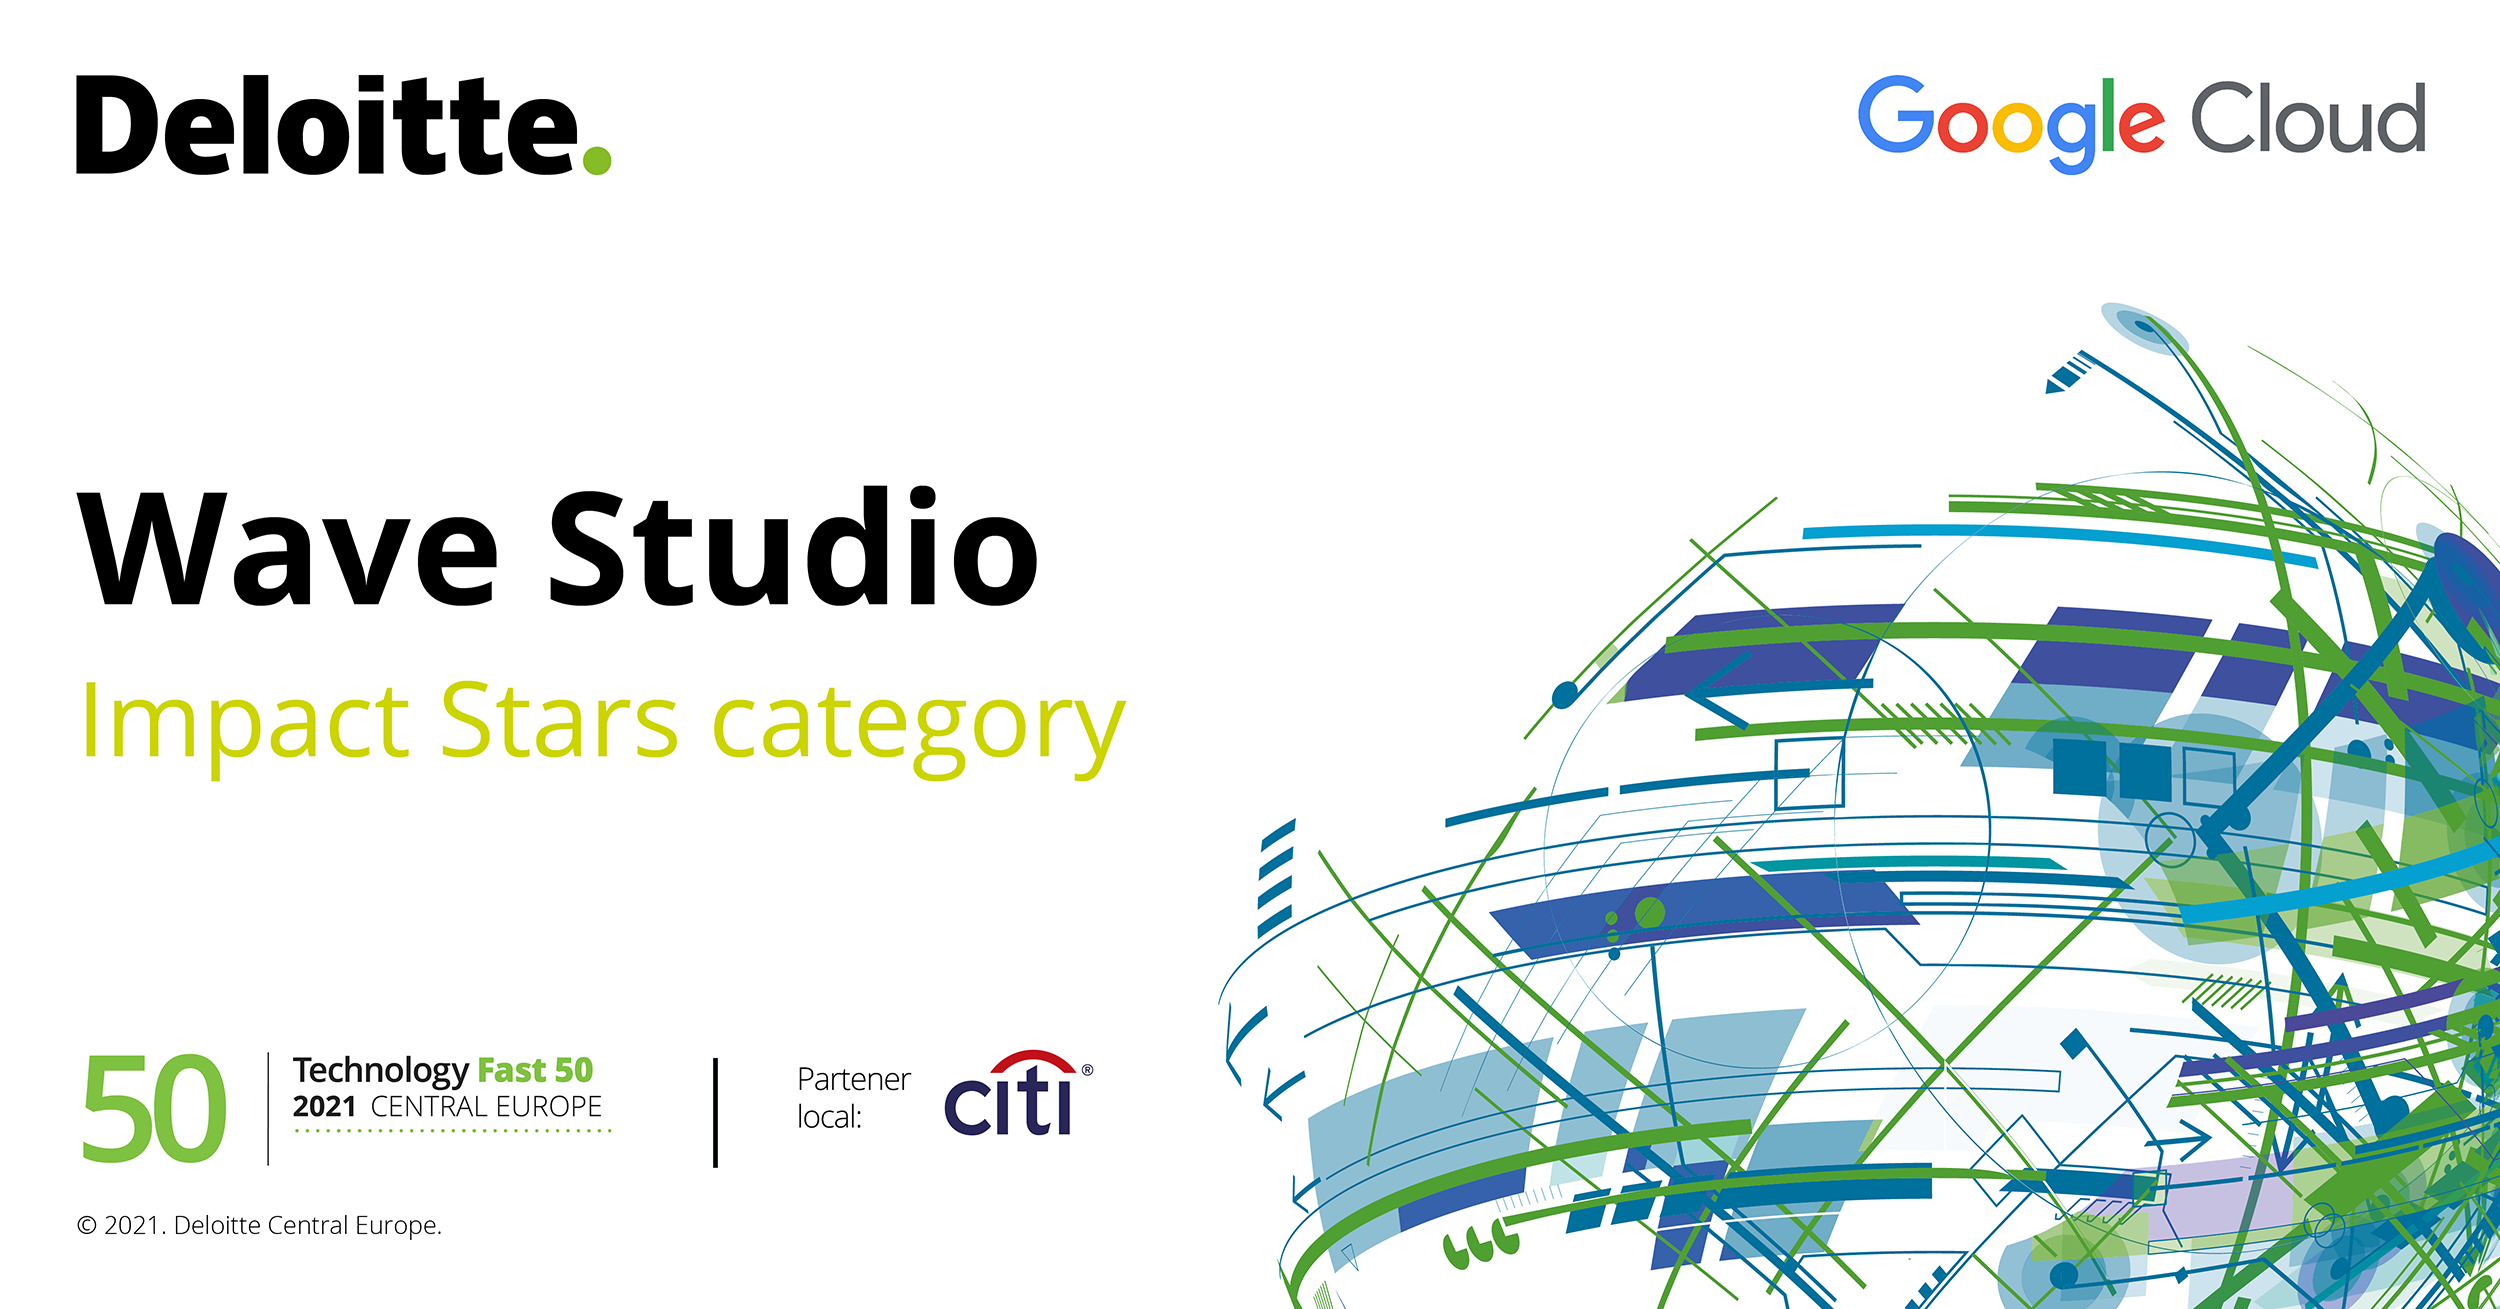 Wave Studio recognized by Deloitte Technology Fast 50 Central Europe 2021 as one of the Impact Stars companies in the region